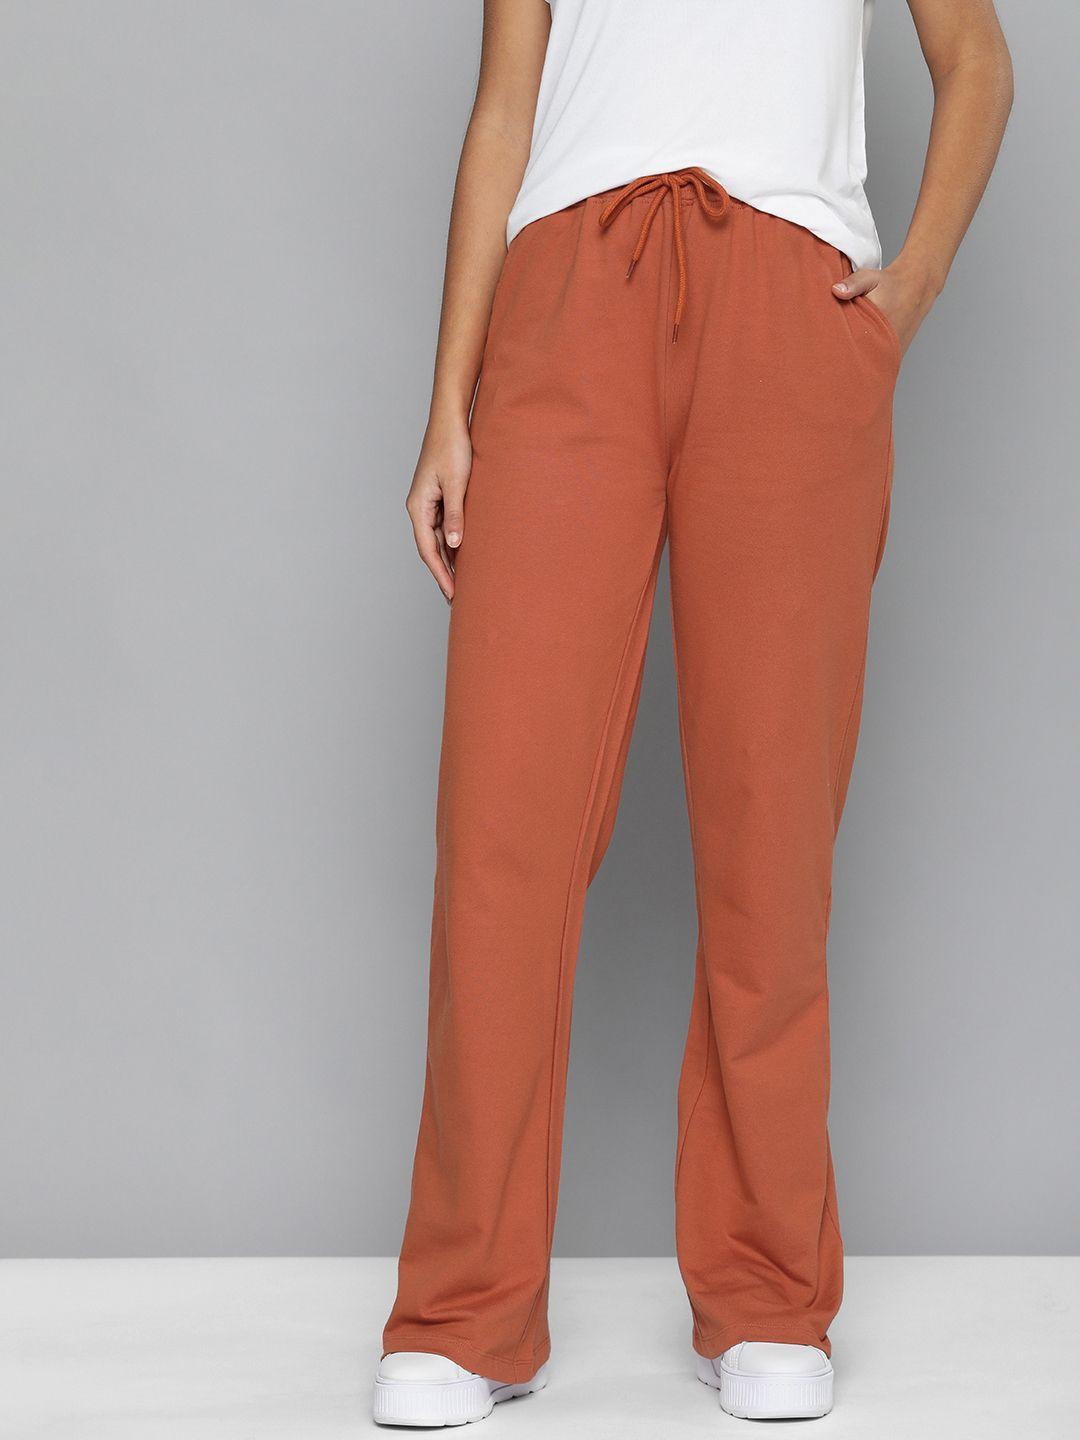 here&now women rust solid regular fit knitted pure cotton track pants